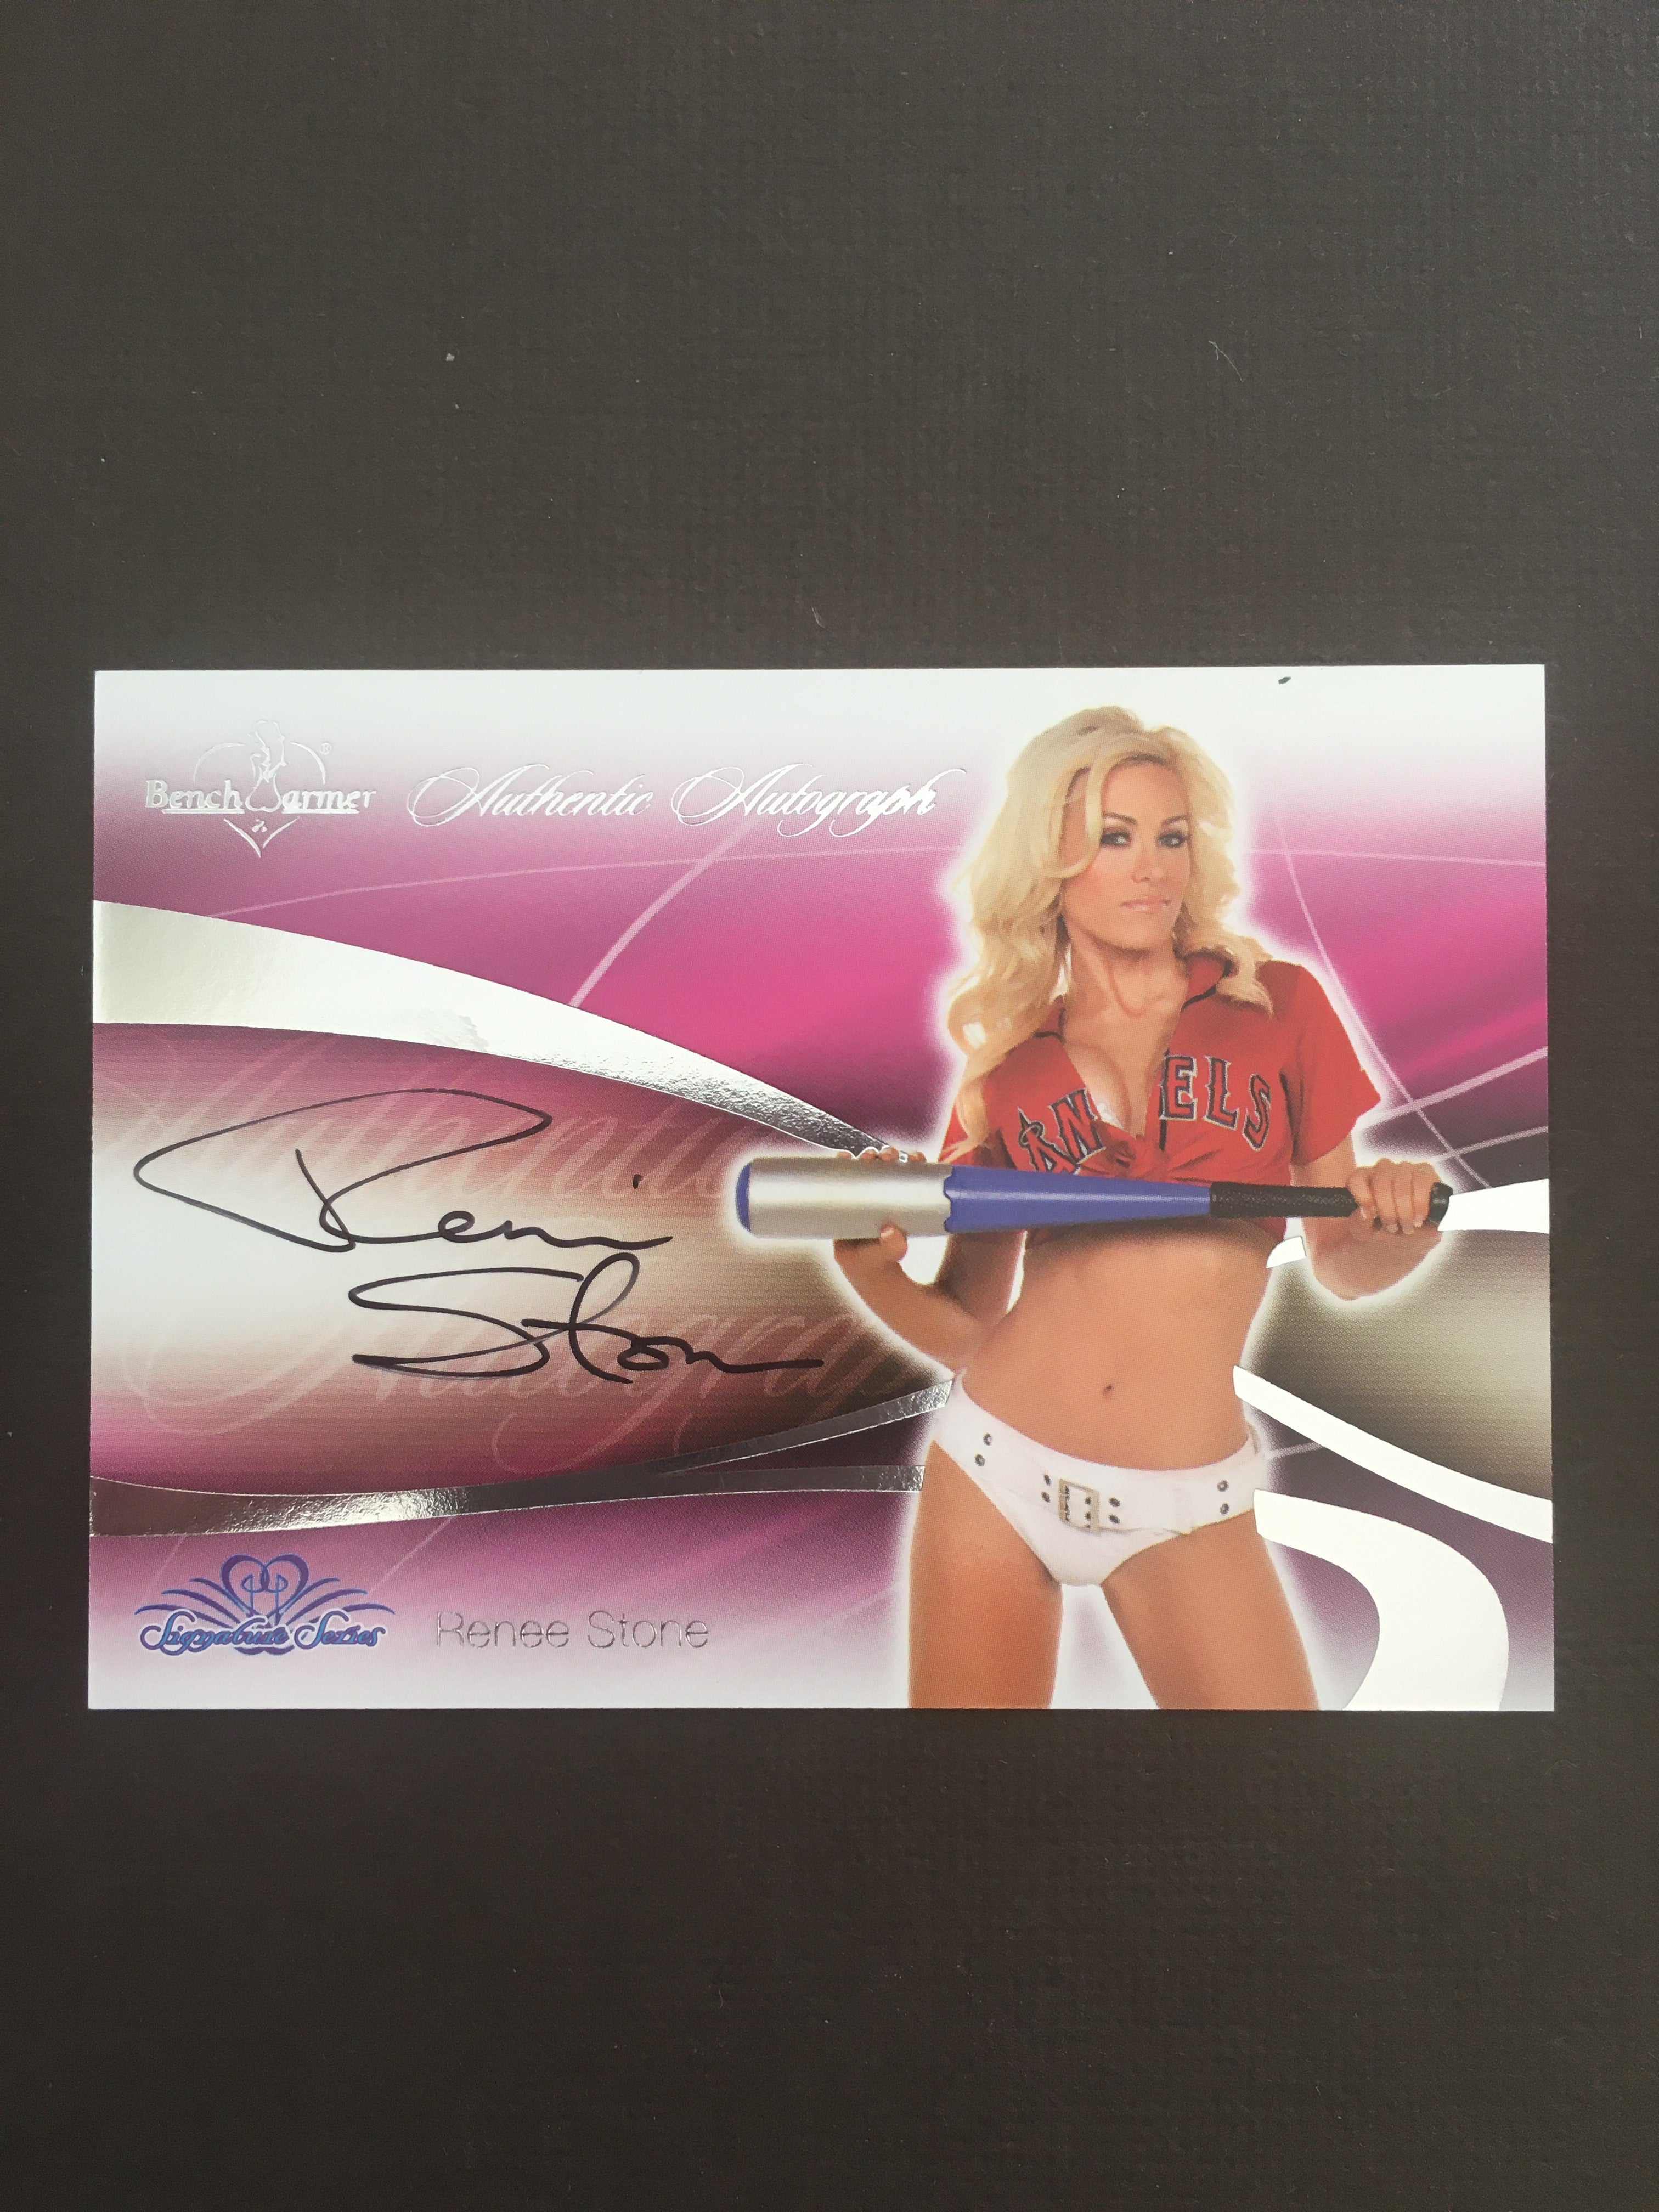 Renee Stone - Autographed Benchwarmer Trading Card (2)